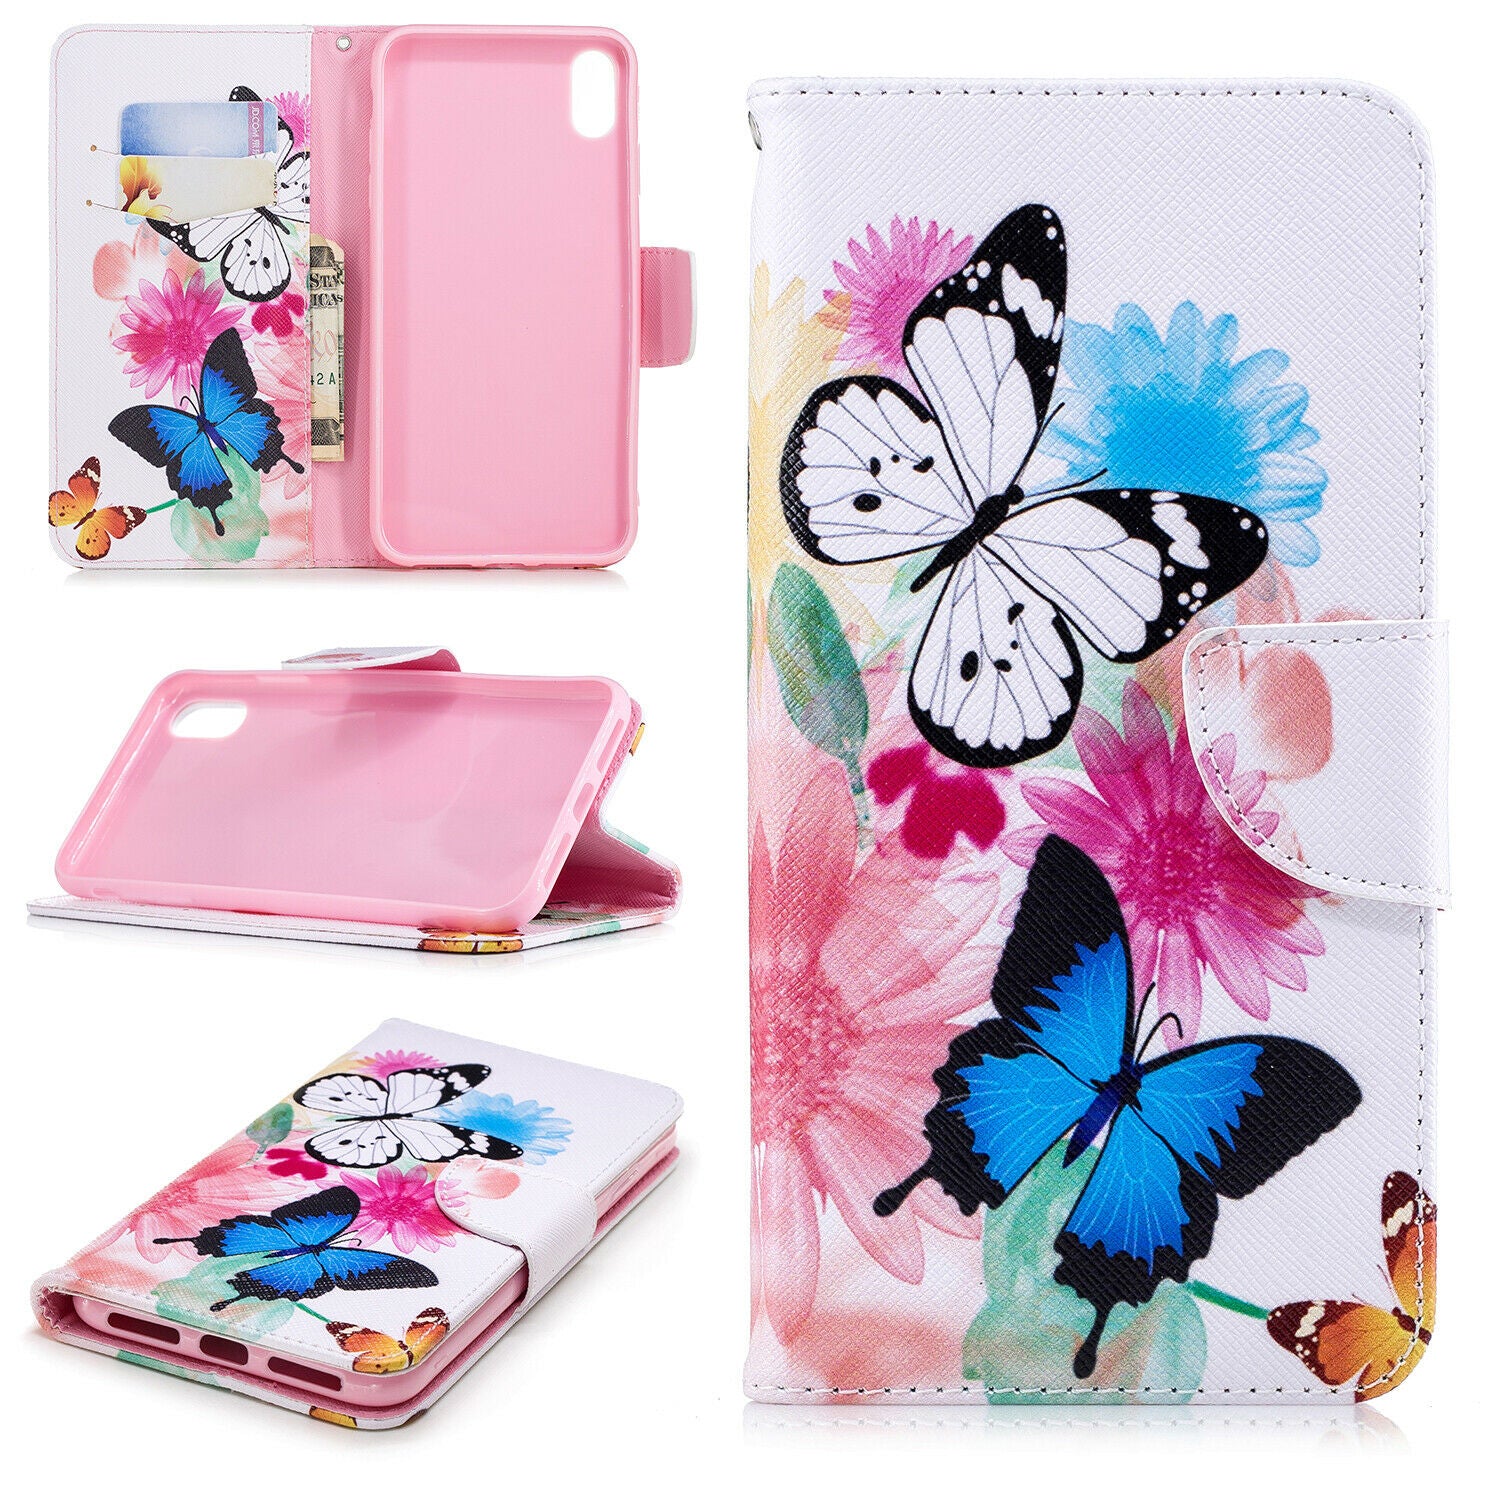 Samsung Galaxy A70 Wallet Leather Case Flip Magnetic Card Slot Cover-Beautiful Butterfiy